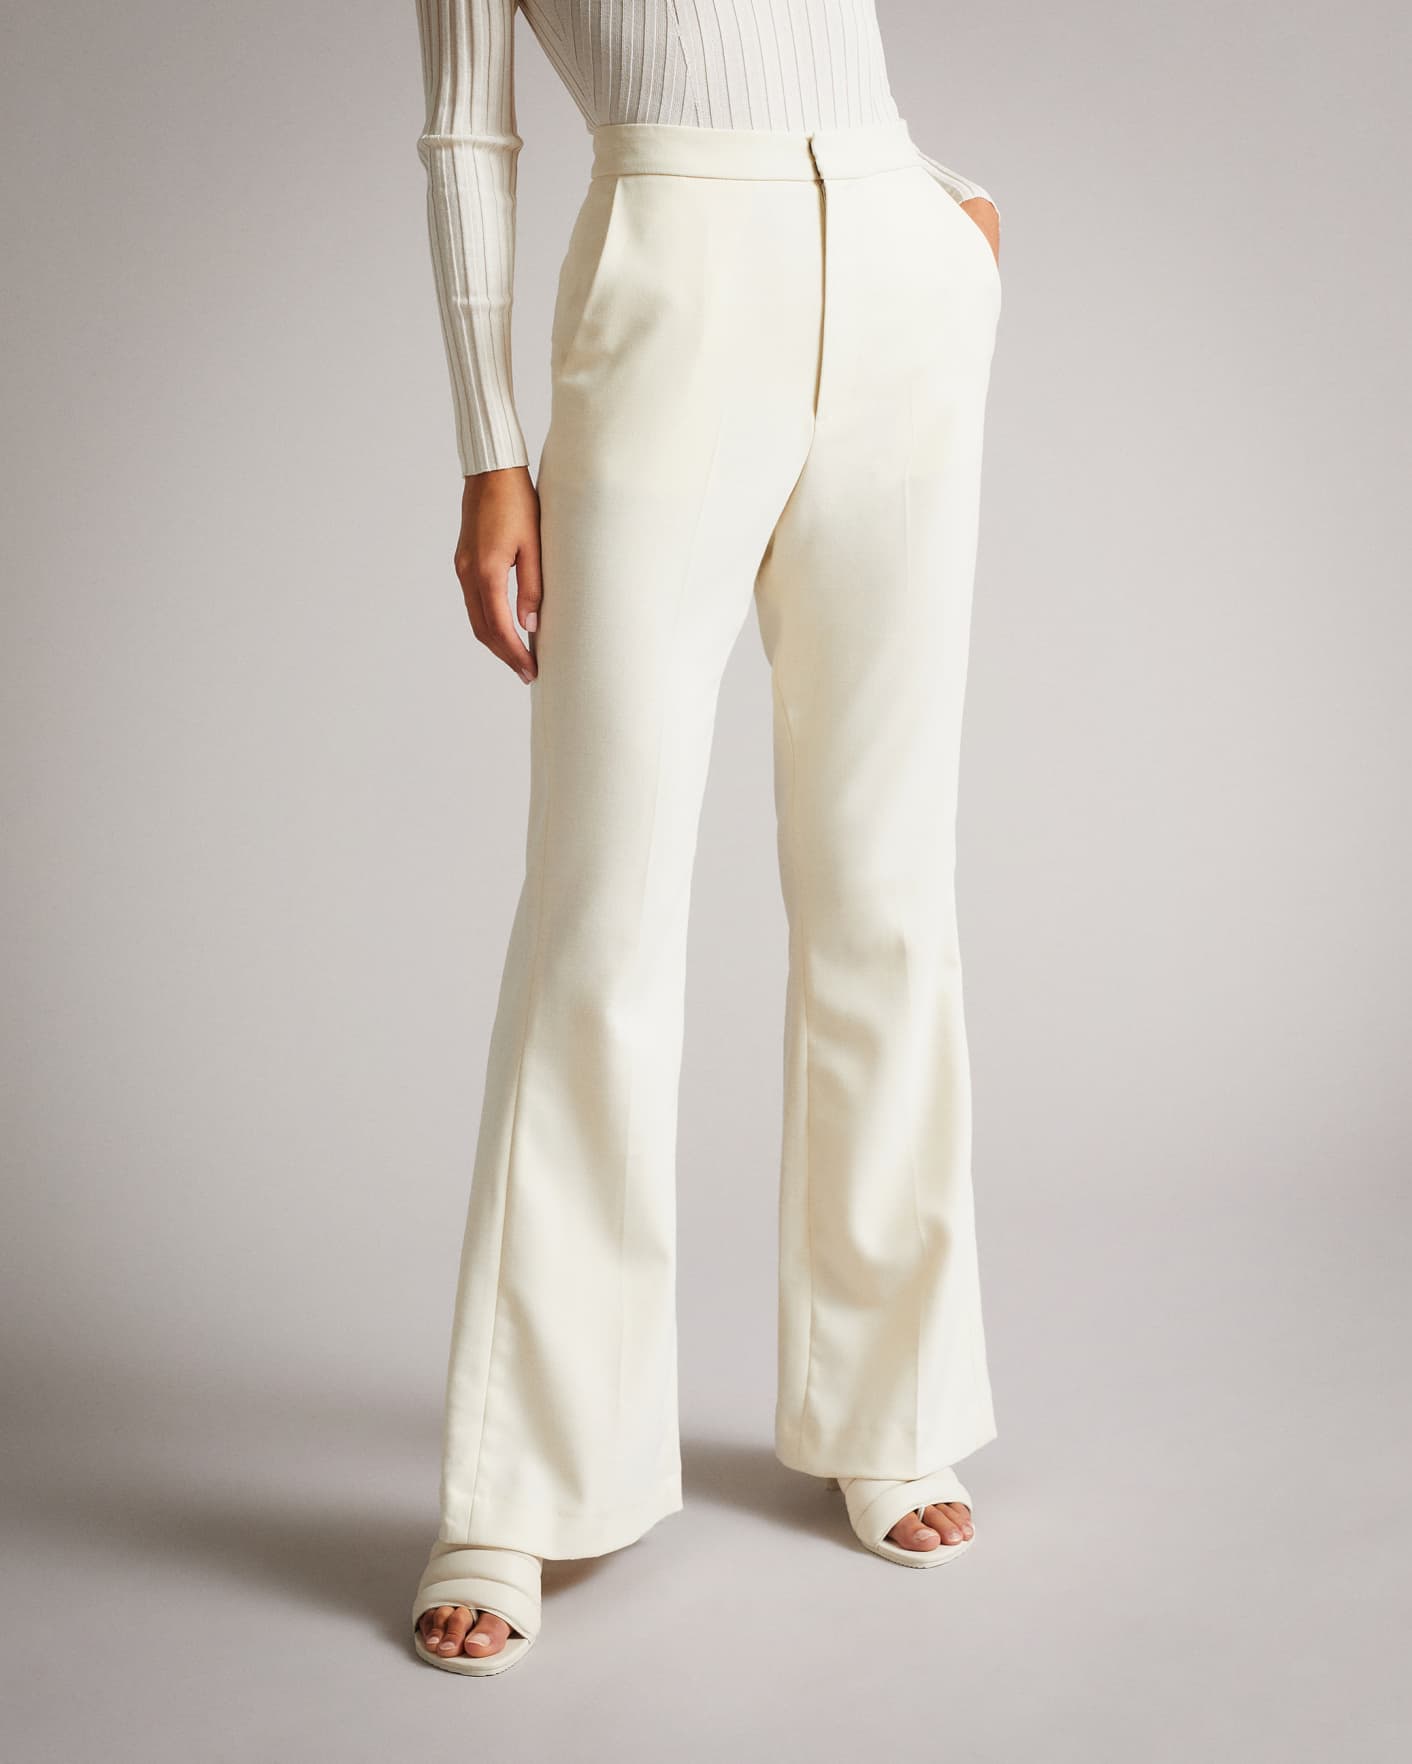 JOANNIT - IVORY | Trousers & Shorts | Ted Baker IE